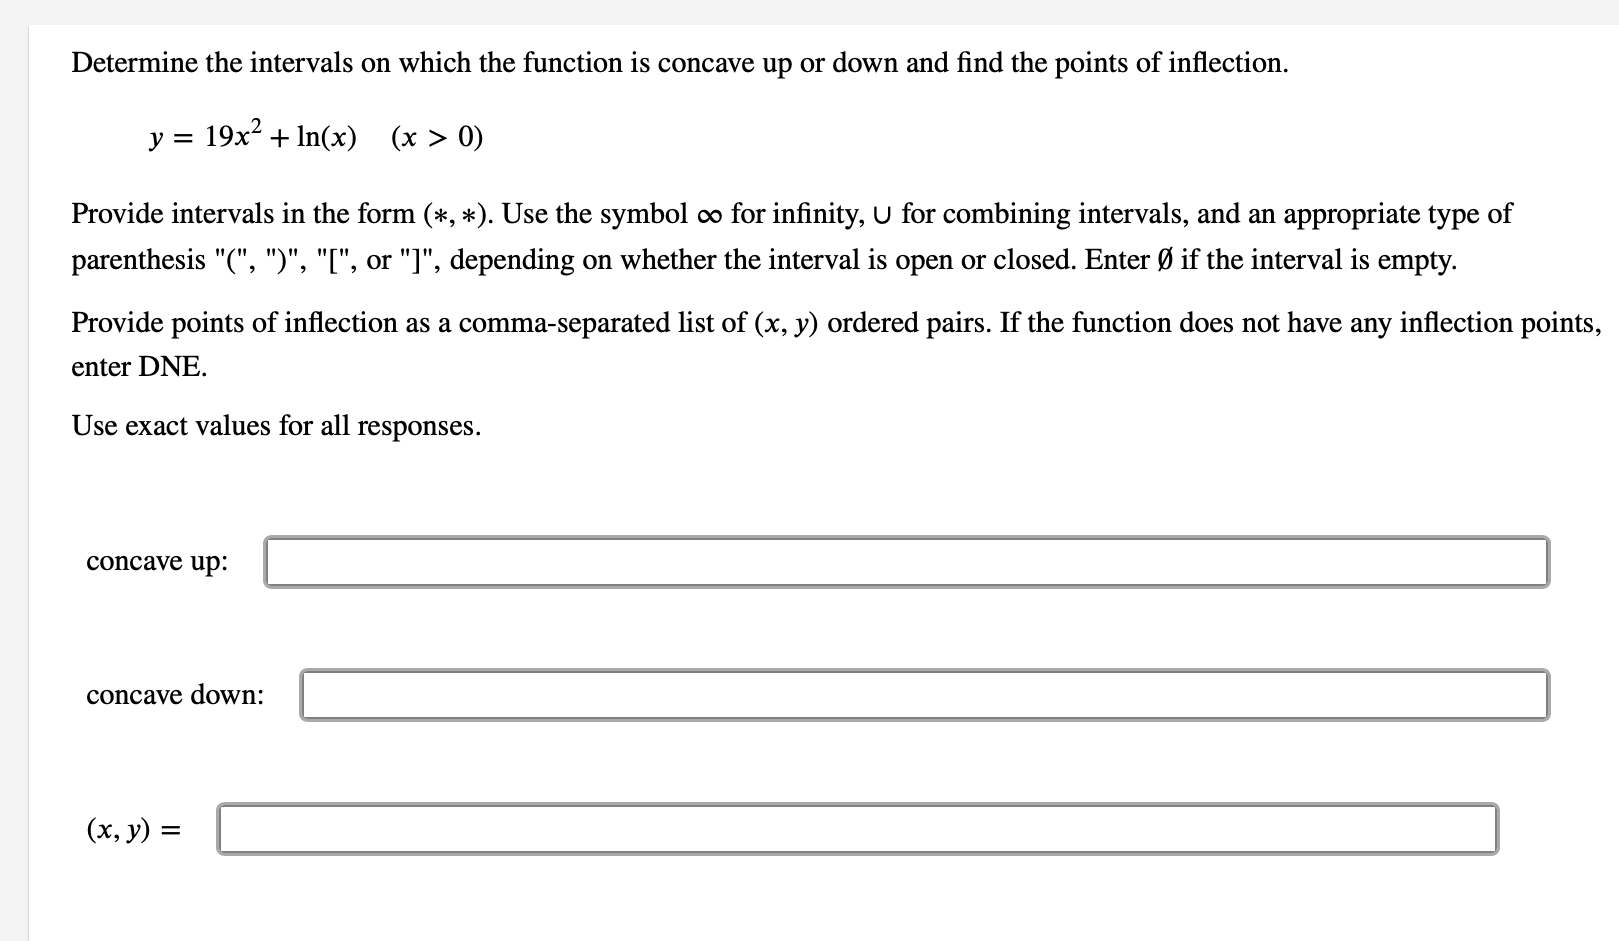 Determine the intervals on which the function is concave up or down and find the points of inflection.
y = 19x + In(x) (x > 0)
Provide intervals in the form (*, *). Use the symbol o for infinity, U for combining intervals, and an appropriate type of
parenthesis "(", ")", "[", or "]", depending on whether the interval is open or closed. Enter Ø if the interval is empty.
Provide points of inflection as a comma-separated list of (x, y) ordered pairs. If the function does not have any inflection points,
enter DNE.
Use exact values for all responses.
